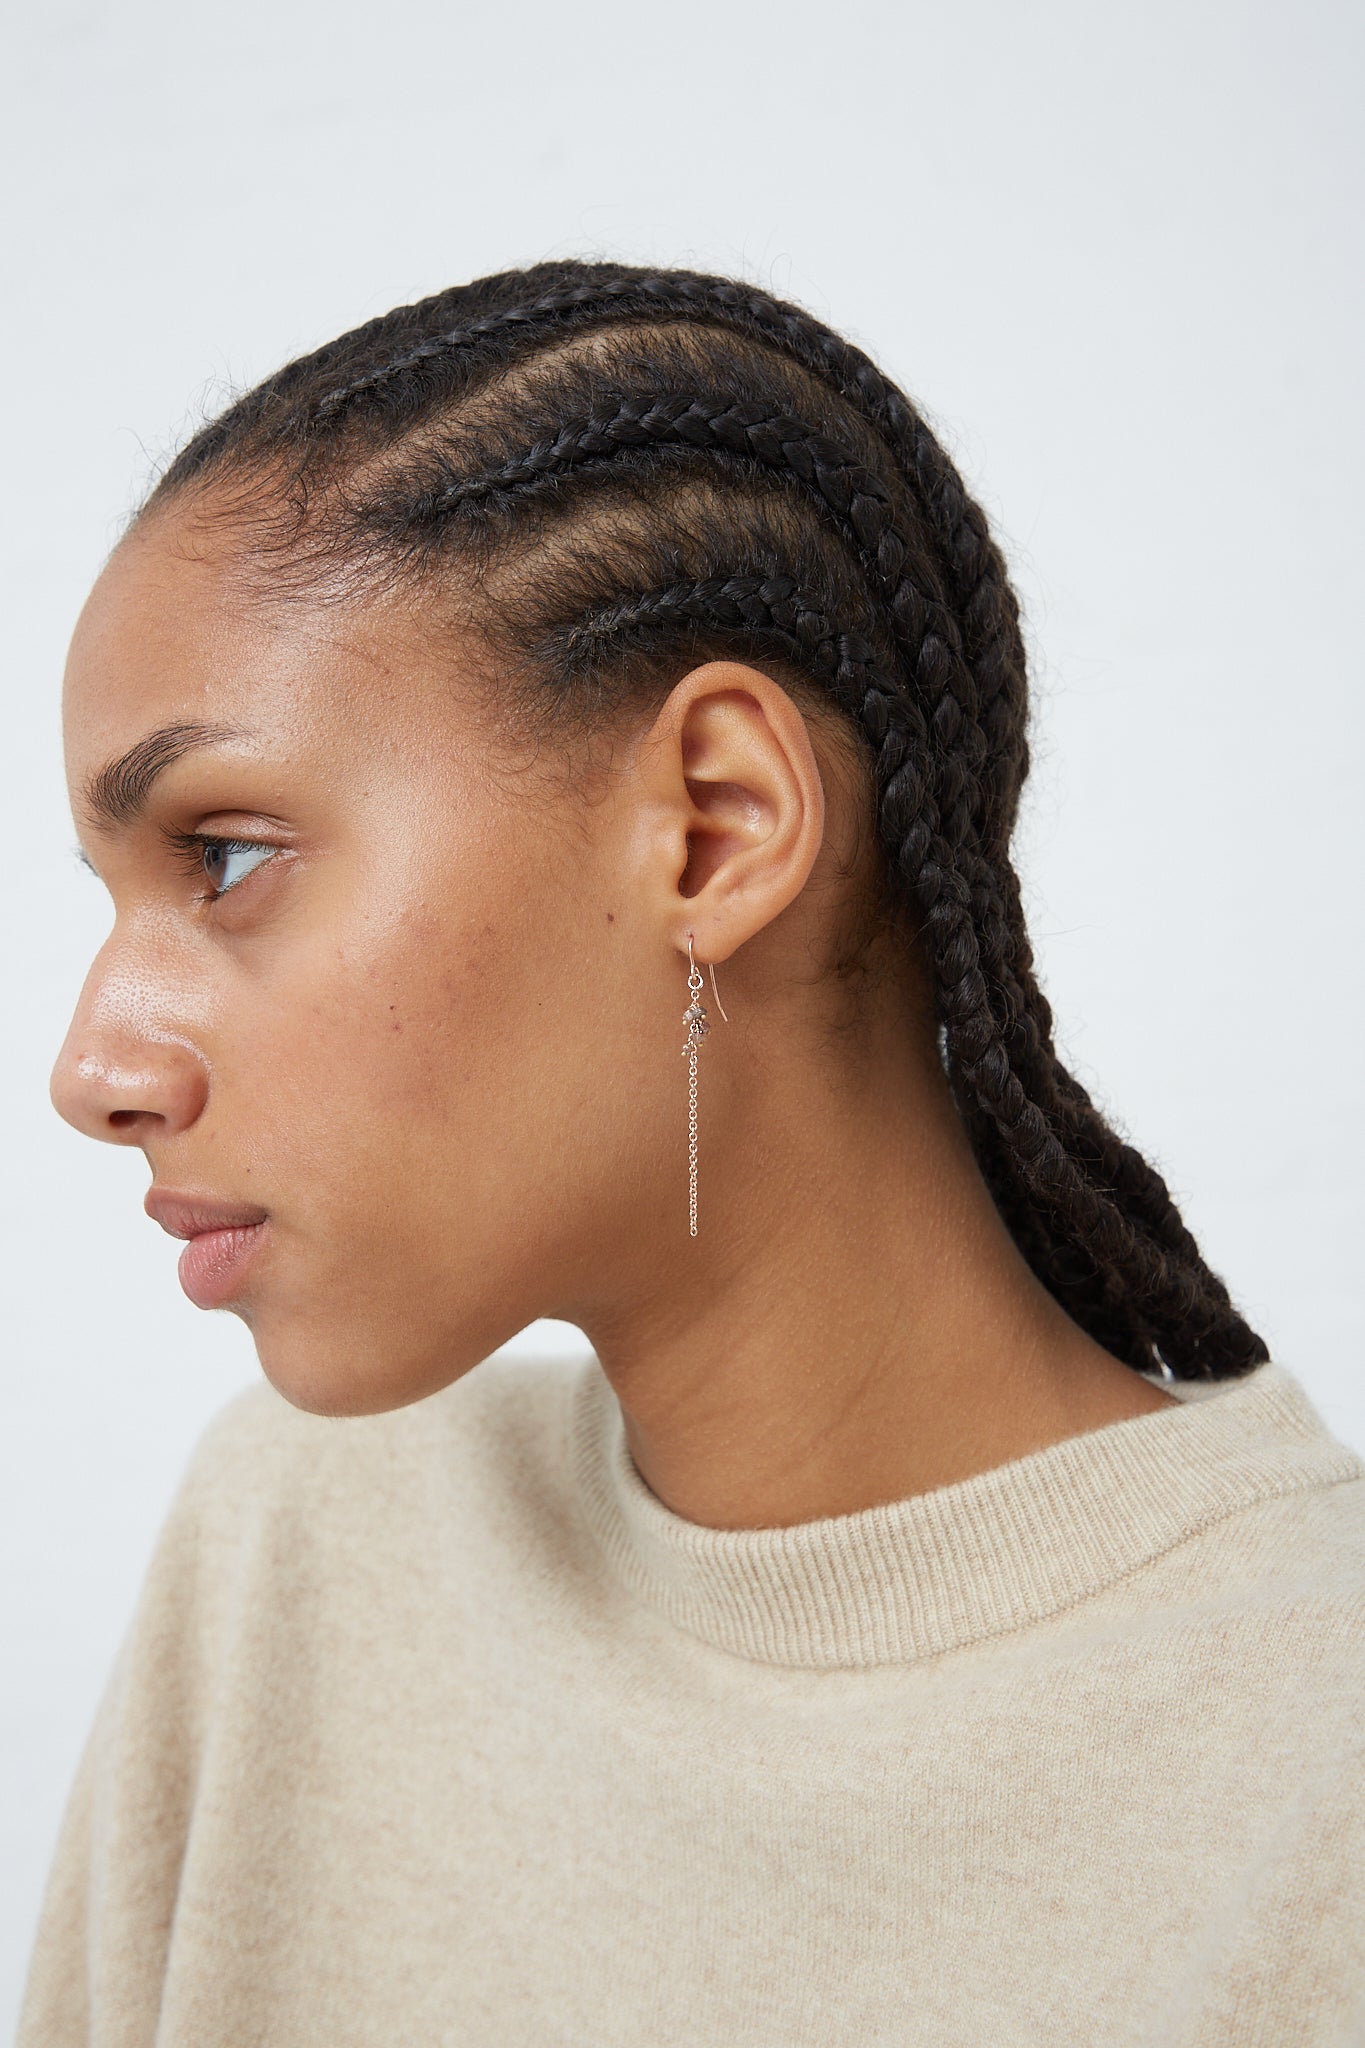 A woman wearing Stephanie Schneider's rose gold plated and raw brown diamond earrings with braided hair and a pair of earrings.